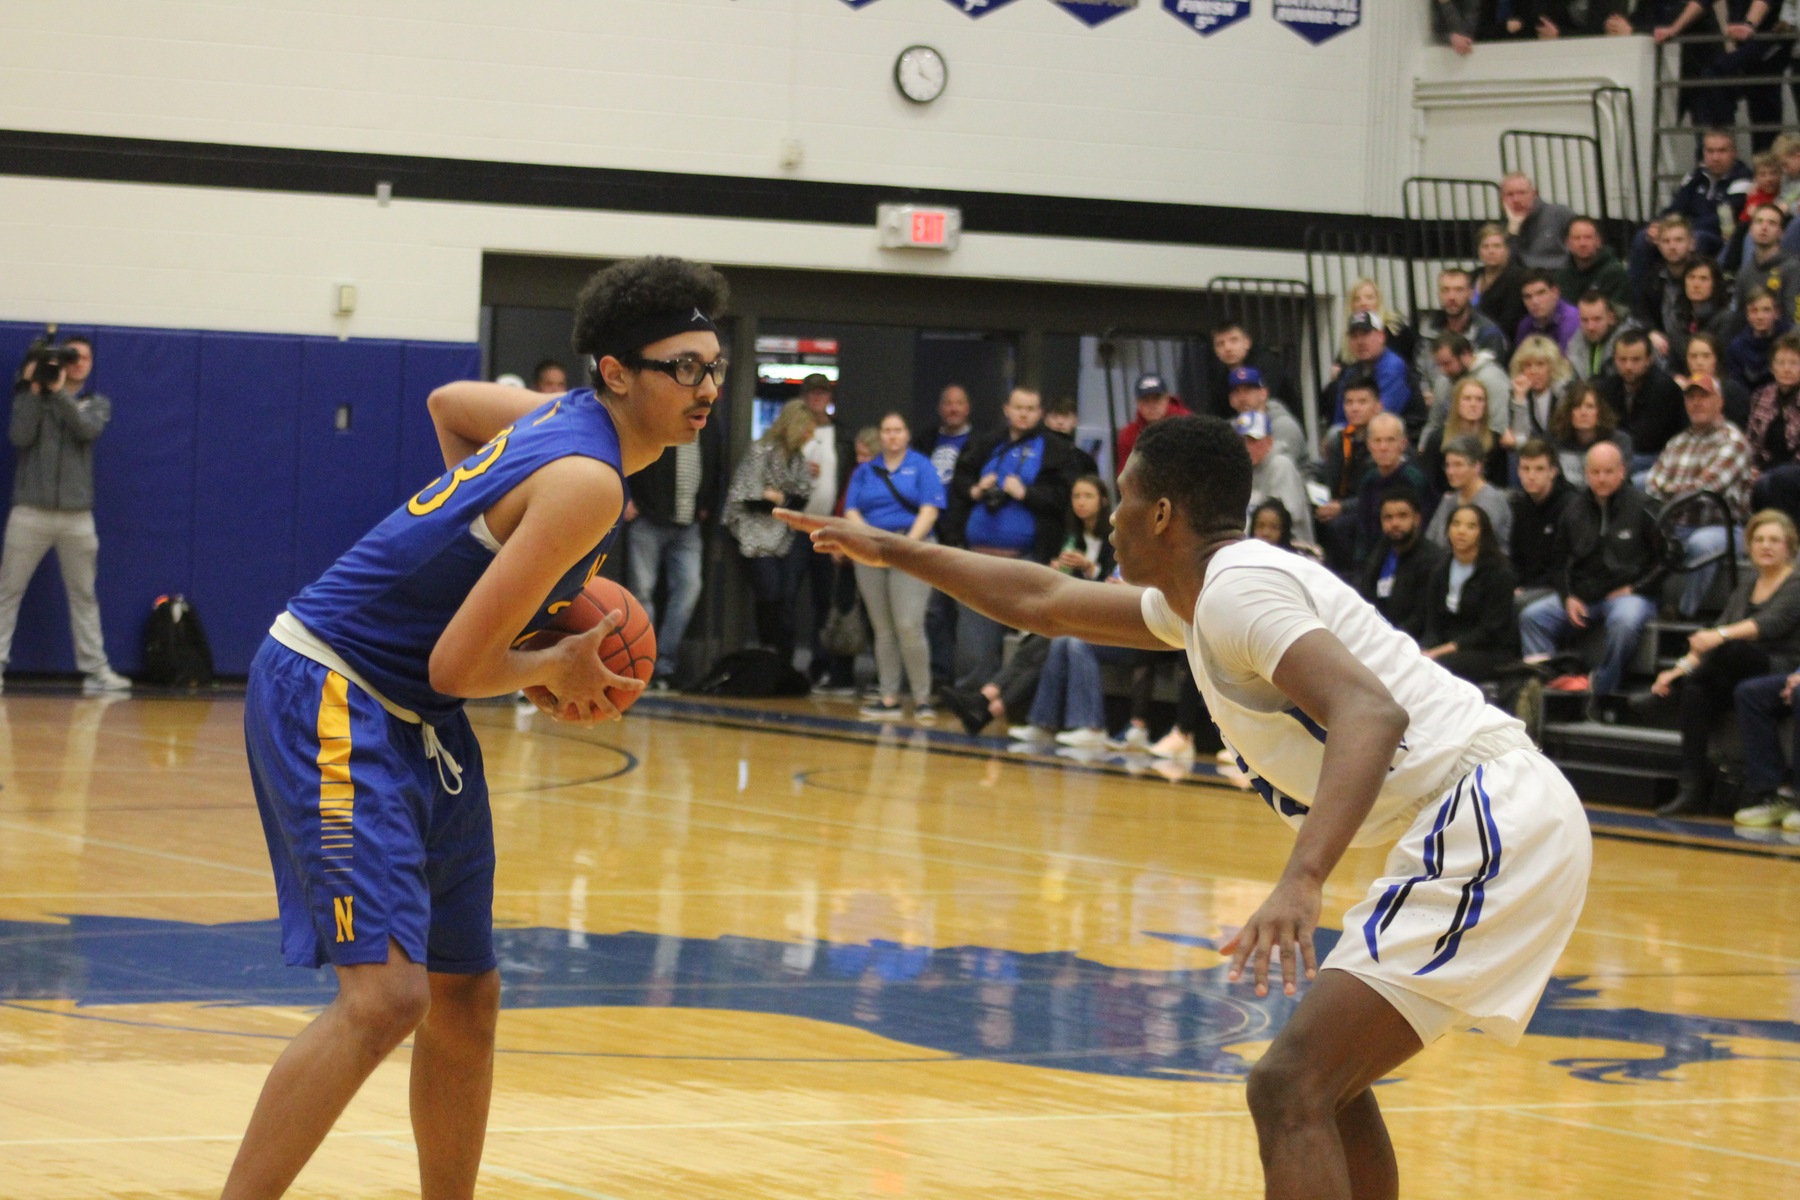 NIACC's Trey Sampson looks to drive to the basket in second half of Saturday's regional title game.